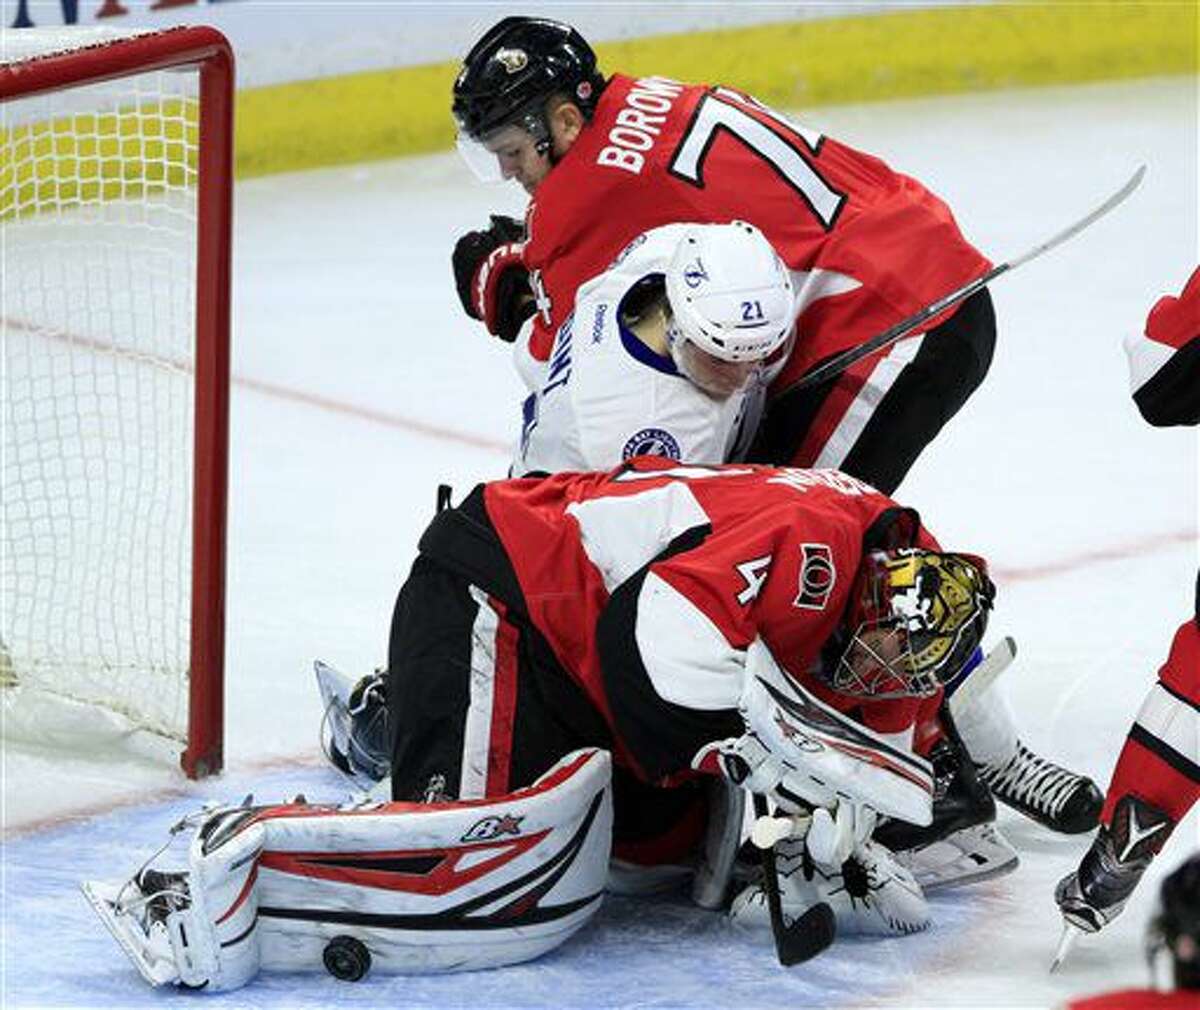 Ottawa Senators goaltender Craig Anderson (41) looks for the puck as teammate Mark Borowiecki (74) checks Tampa Bay Lighting's Brayden Point (21) during the second period of an NHL hockey game Saturday, Oct. 22, 2016, in Ottawa, Ontario. (Fred Chartrand/The Canadian Press via AP)